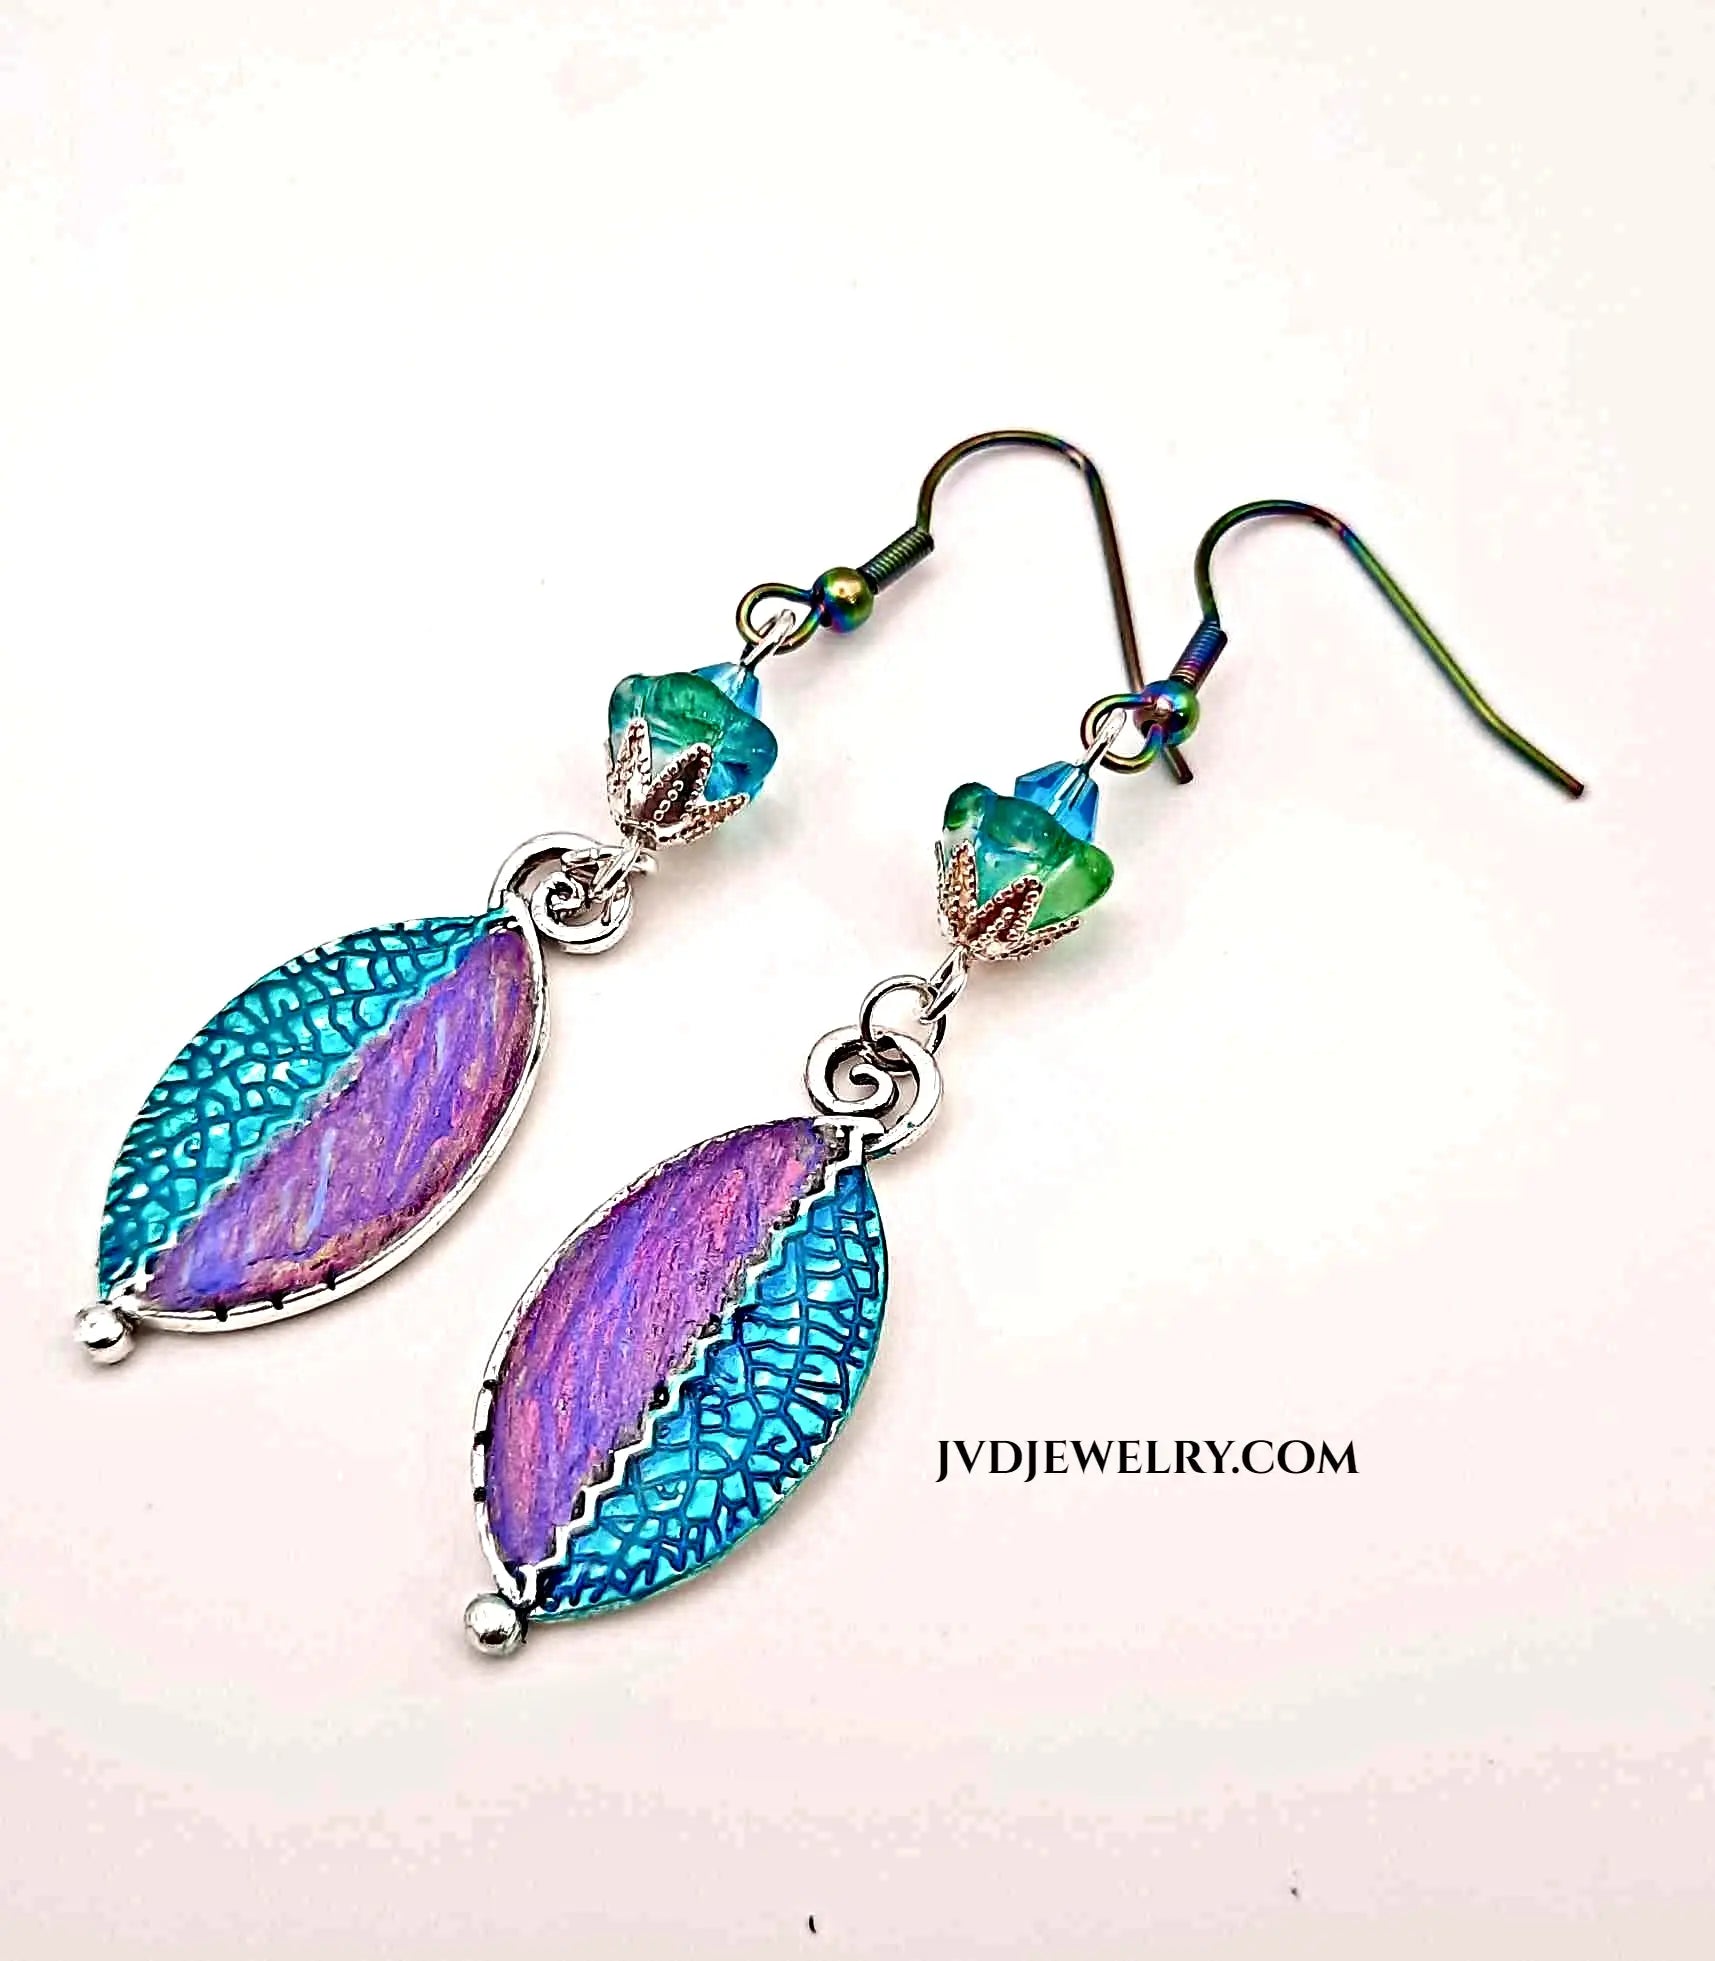 Hand painted iridescent earrings - Image #1